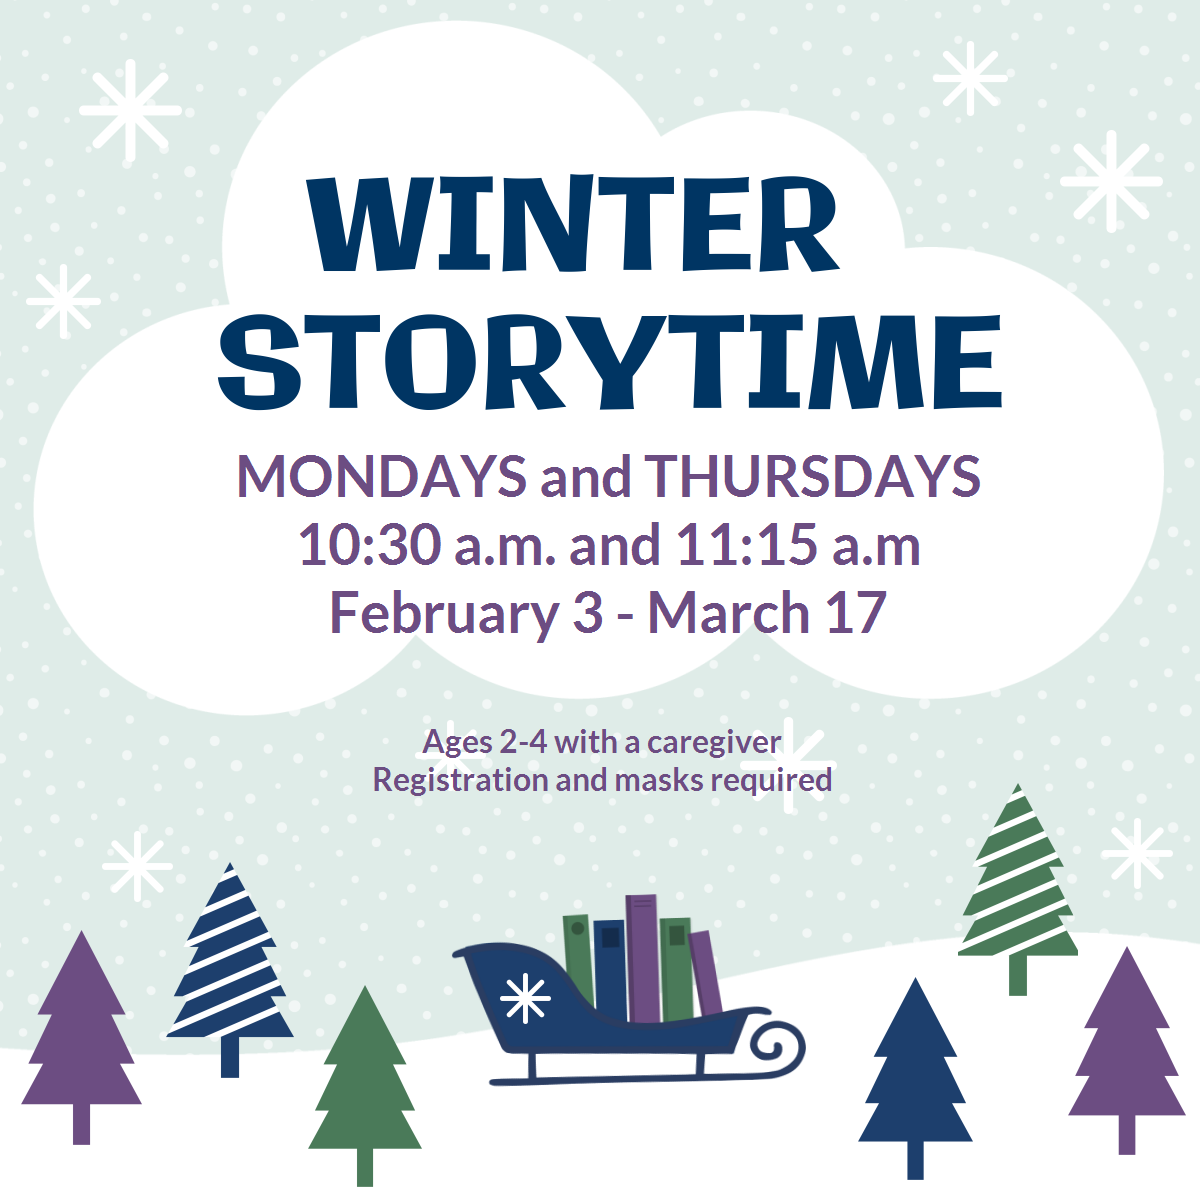 Winter Storytime Mondays and Thursdays Feb 3 - March 17 10:30 am and 11:15 am